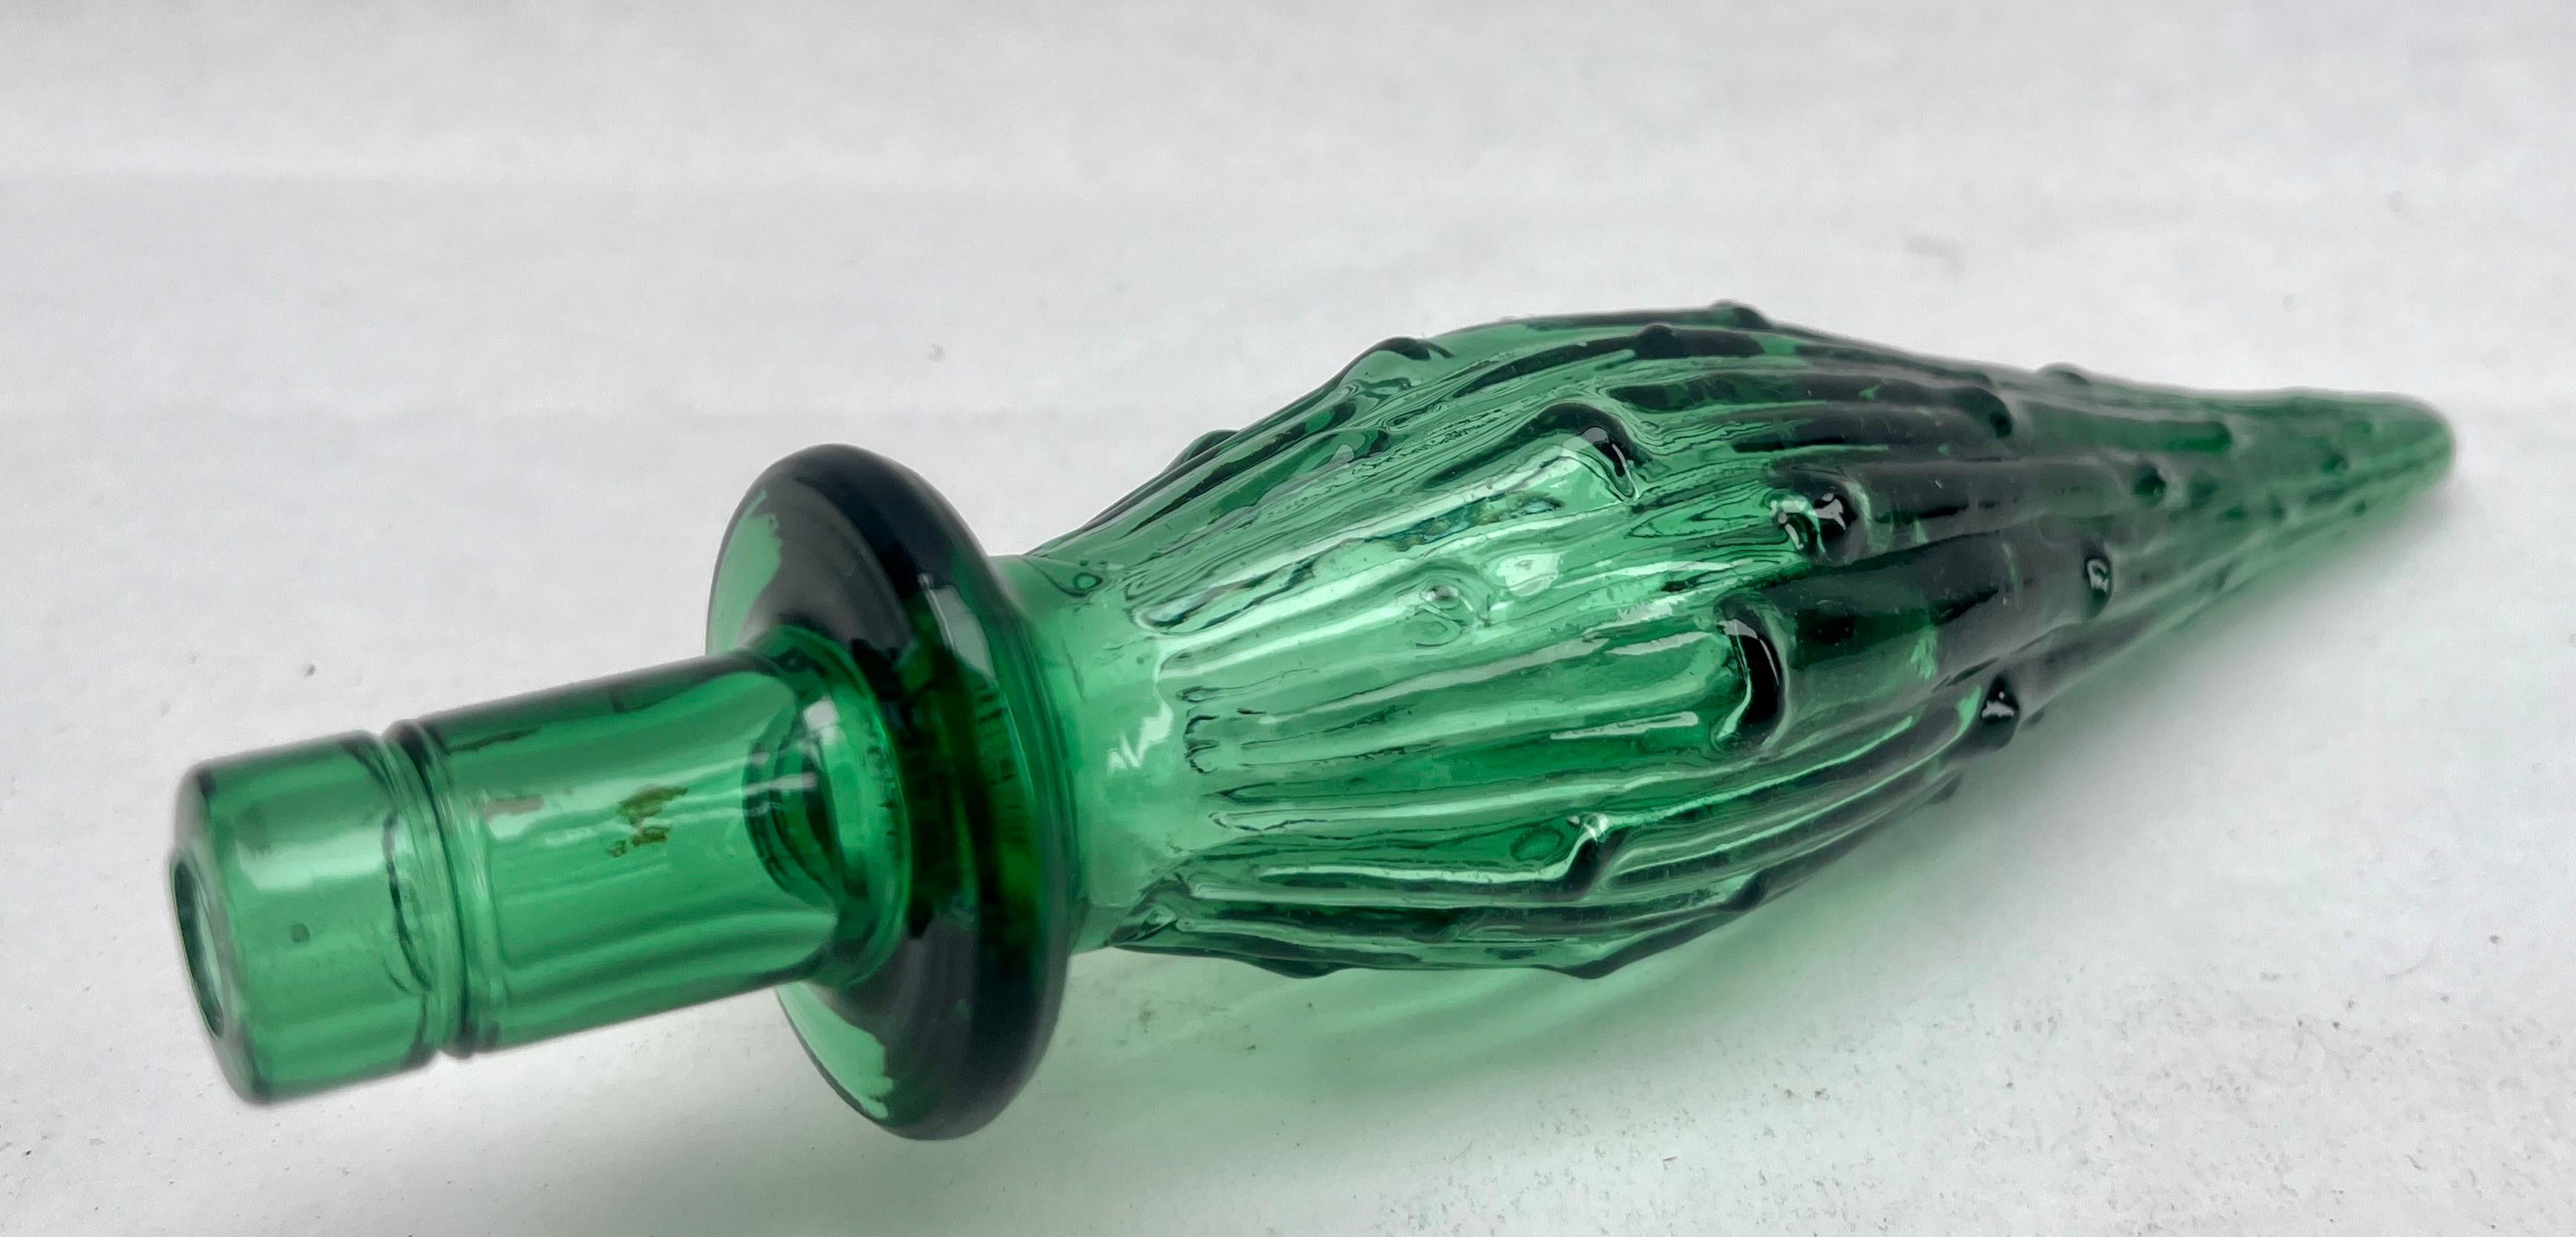 Italian Empoli Geniebottle Green Art Glass from the Mid-20th Century For Sale 1